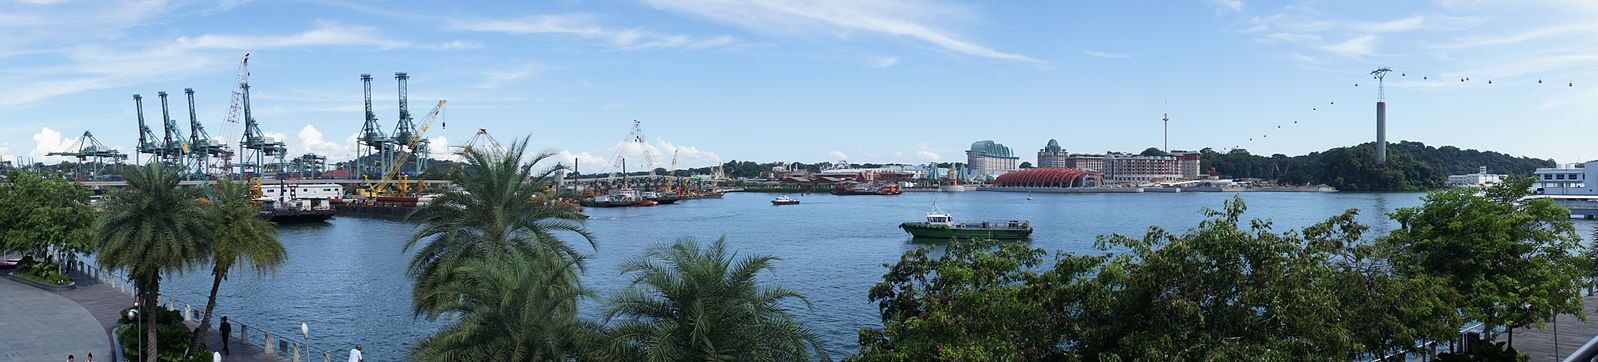 The view of Sentosa from VivoCity. Source: Tdxiang